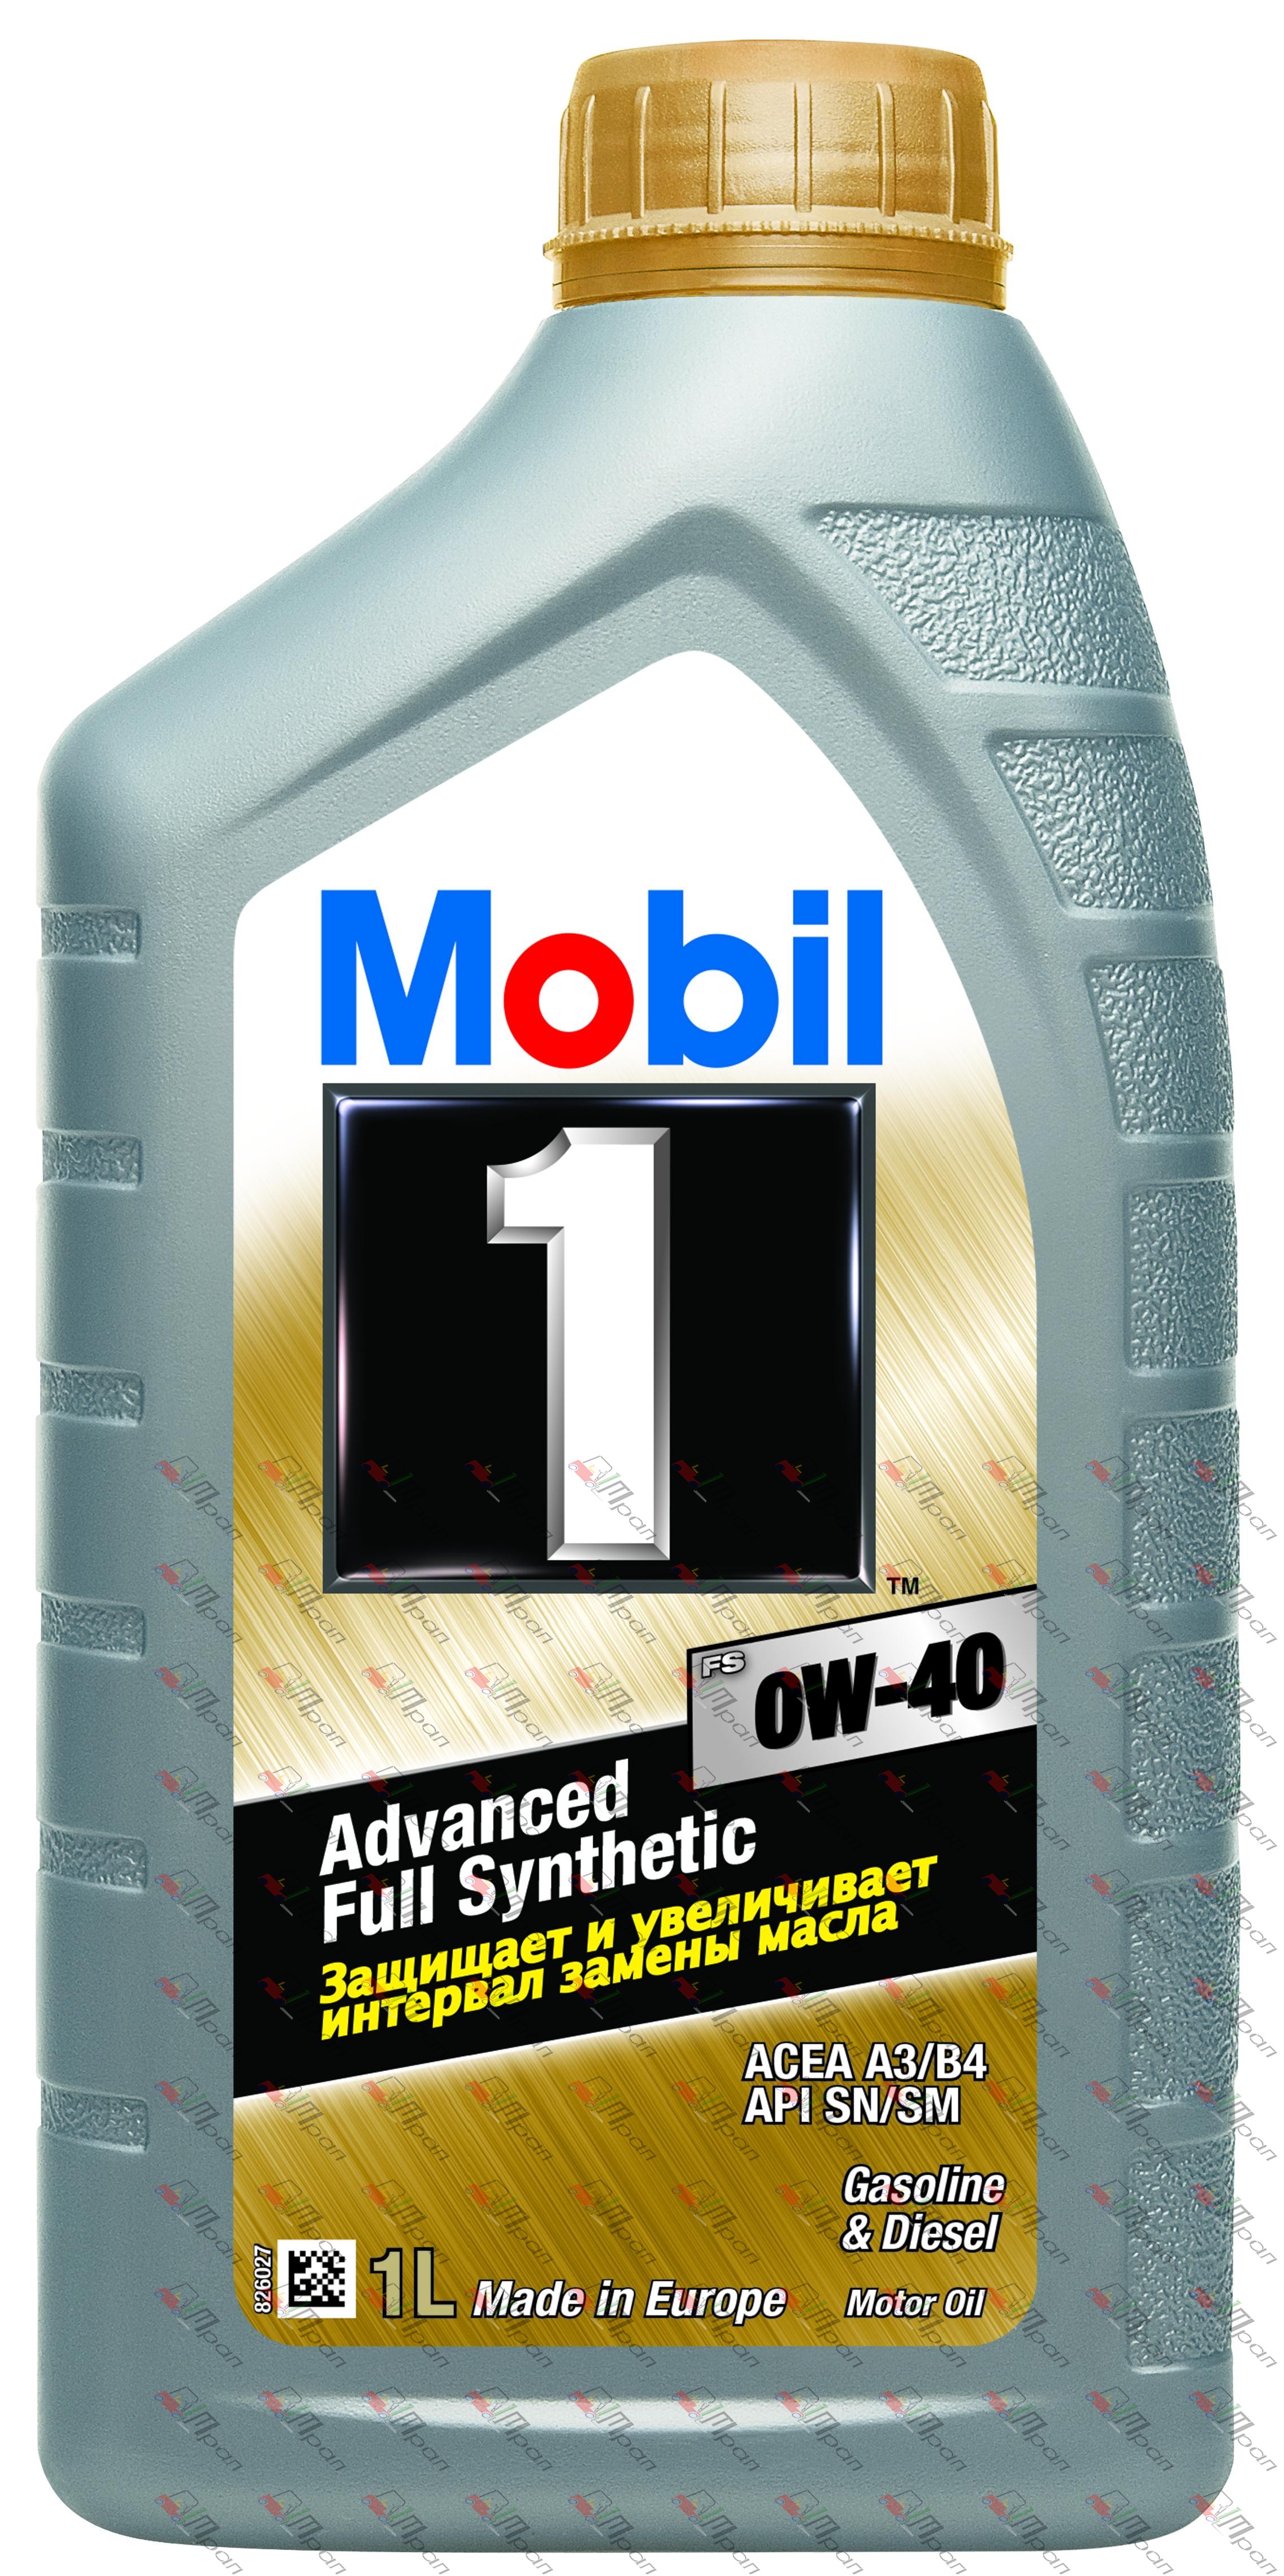 Mobil Масло моторное синтетич. Mobil 1 FS 0w40 1л